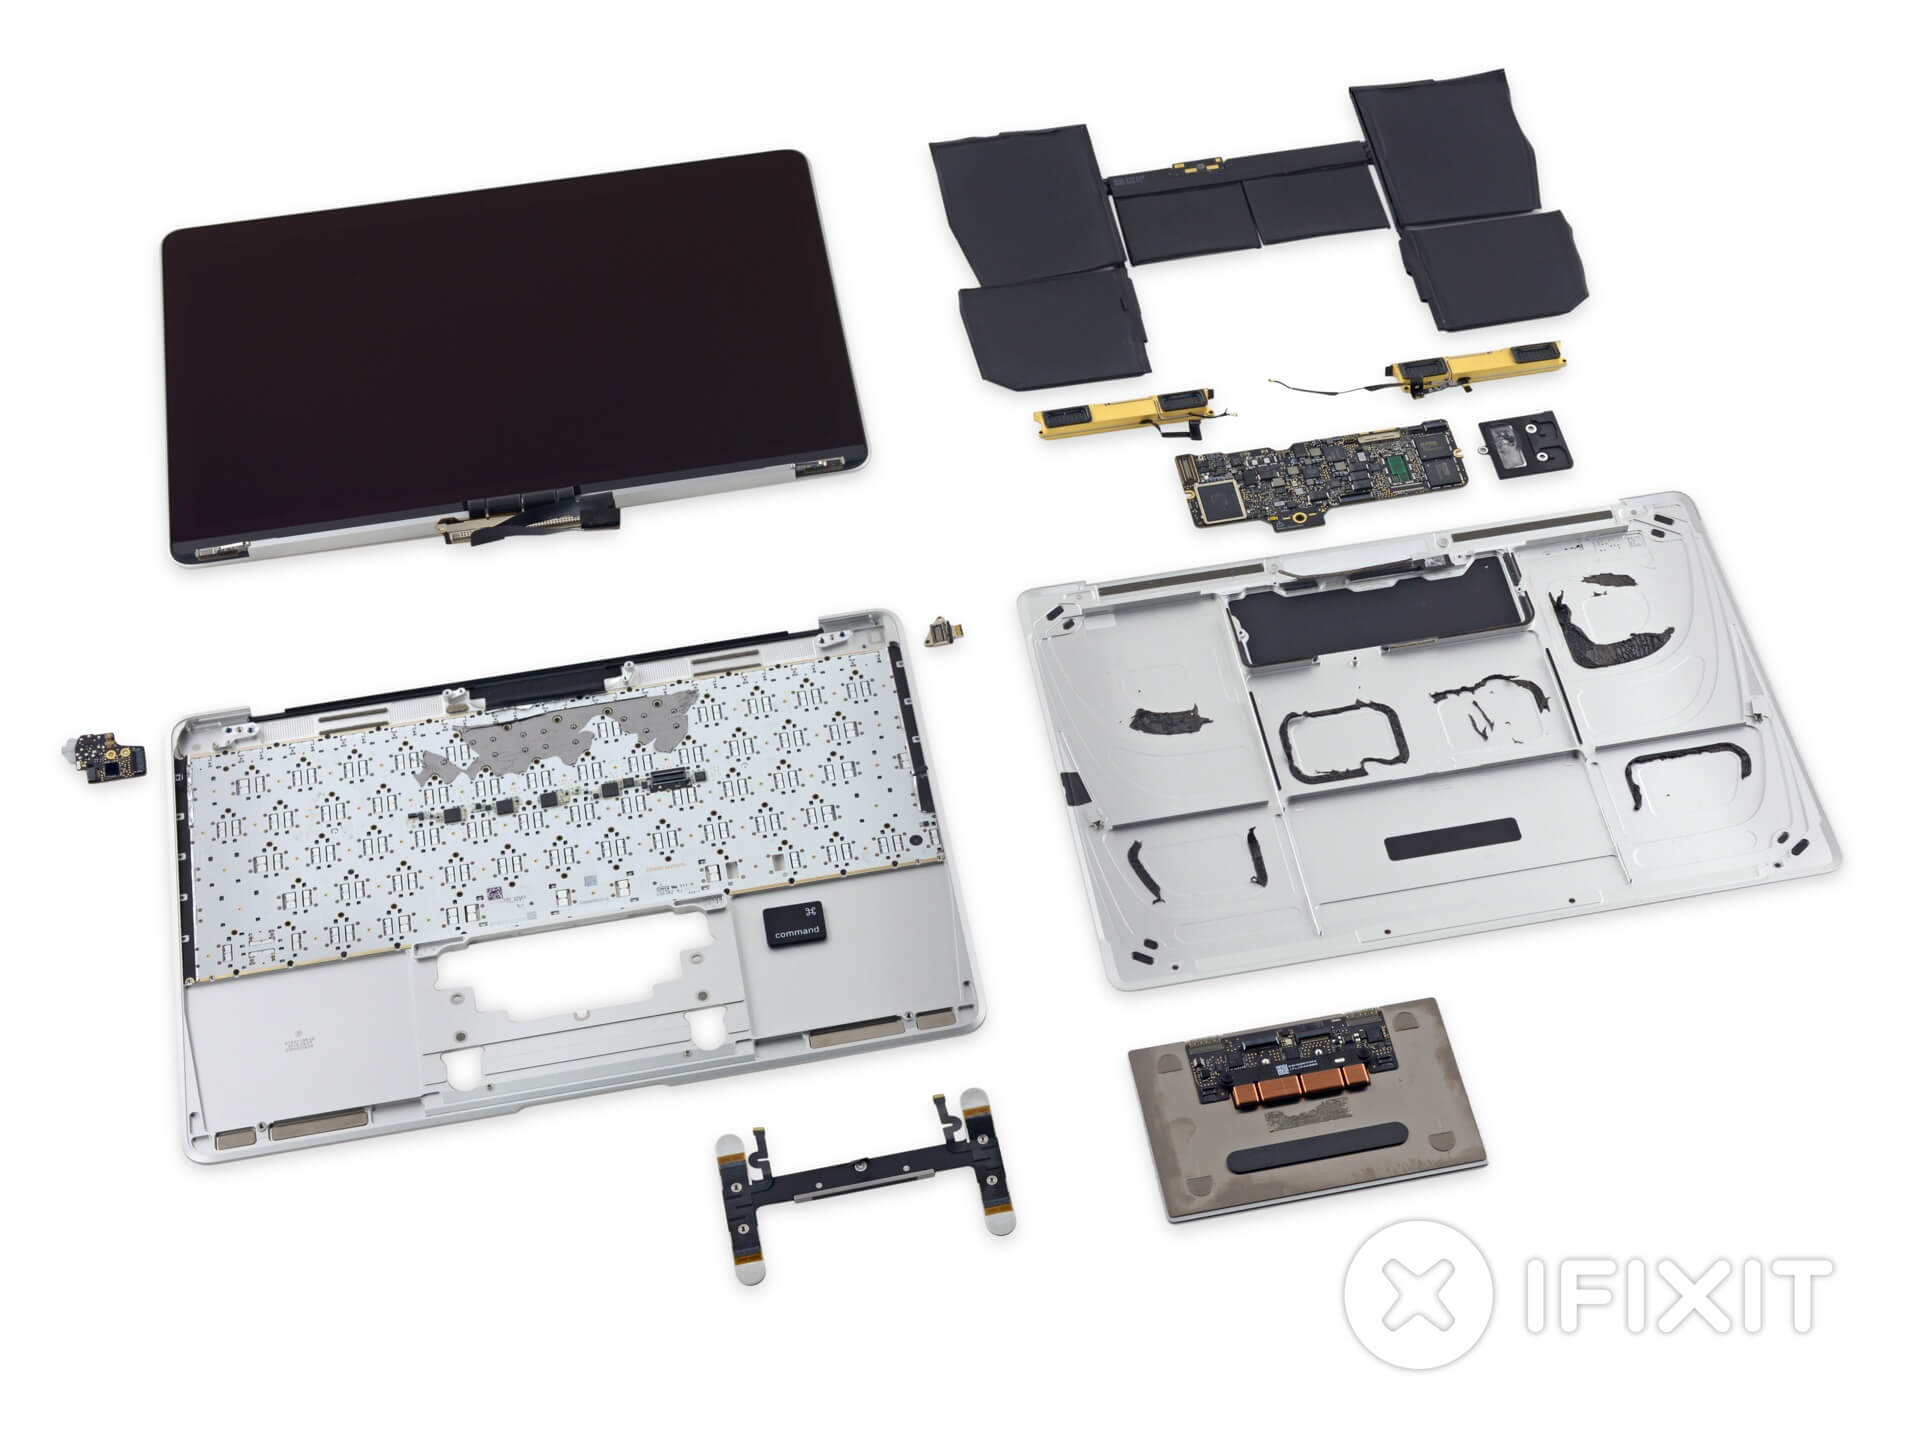 iFixit disassembles the new MacBook and shows how difficult it is to do any type of repair on the machine